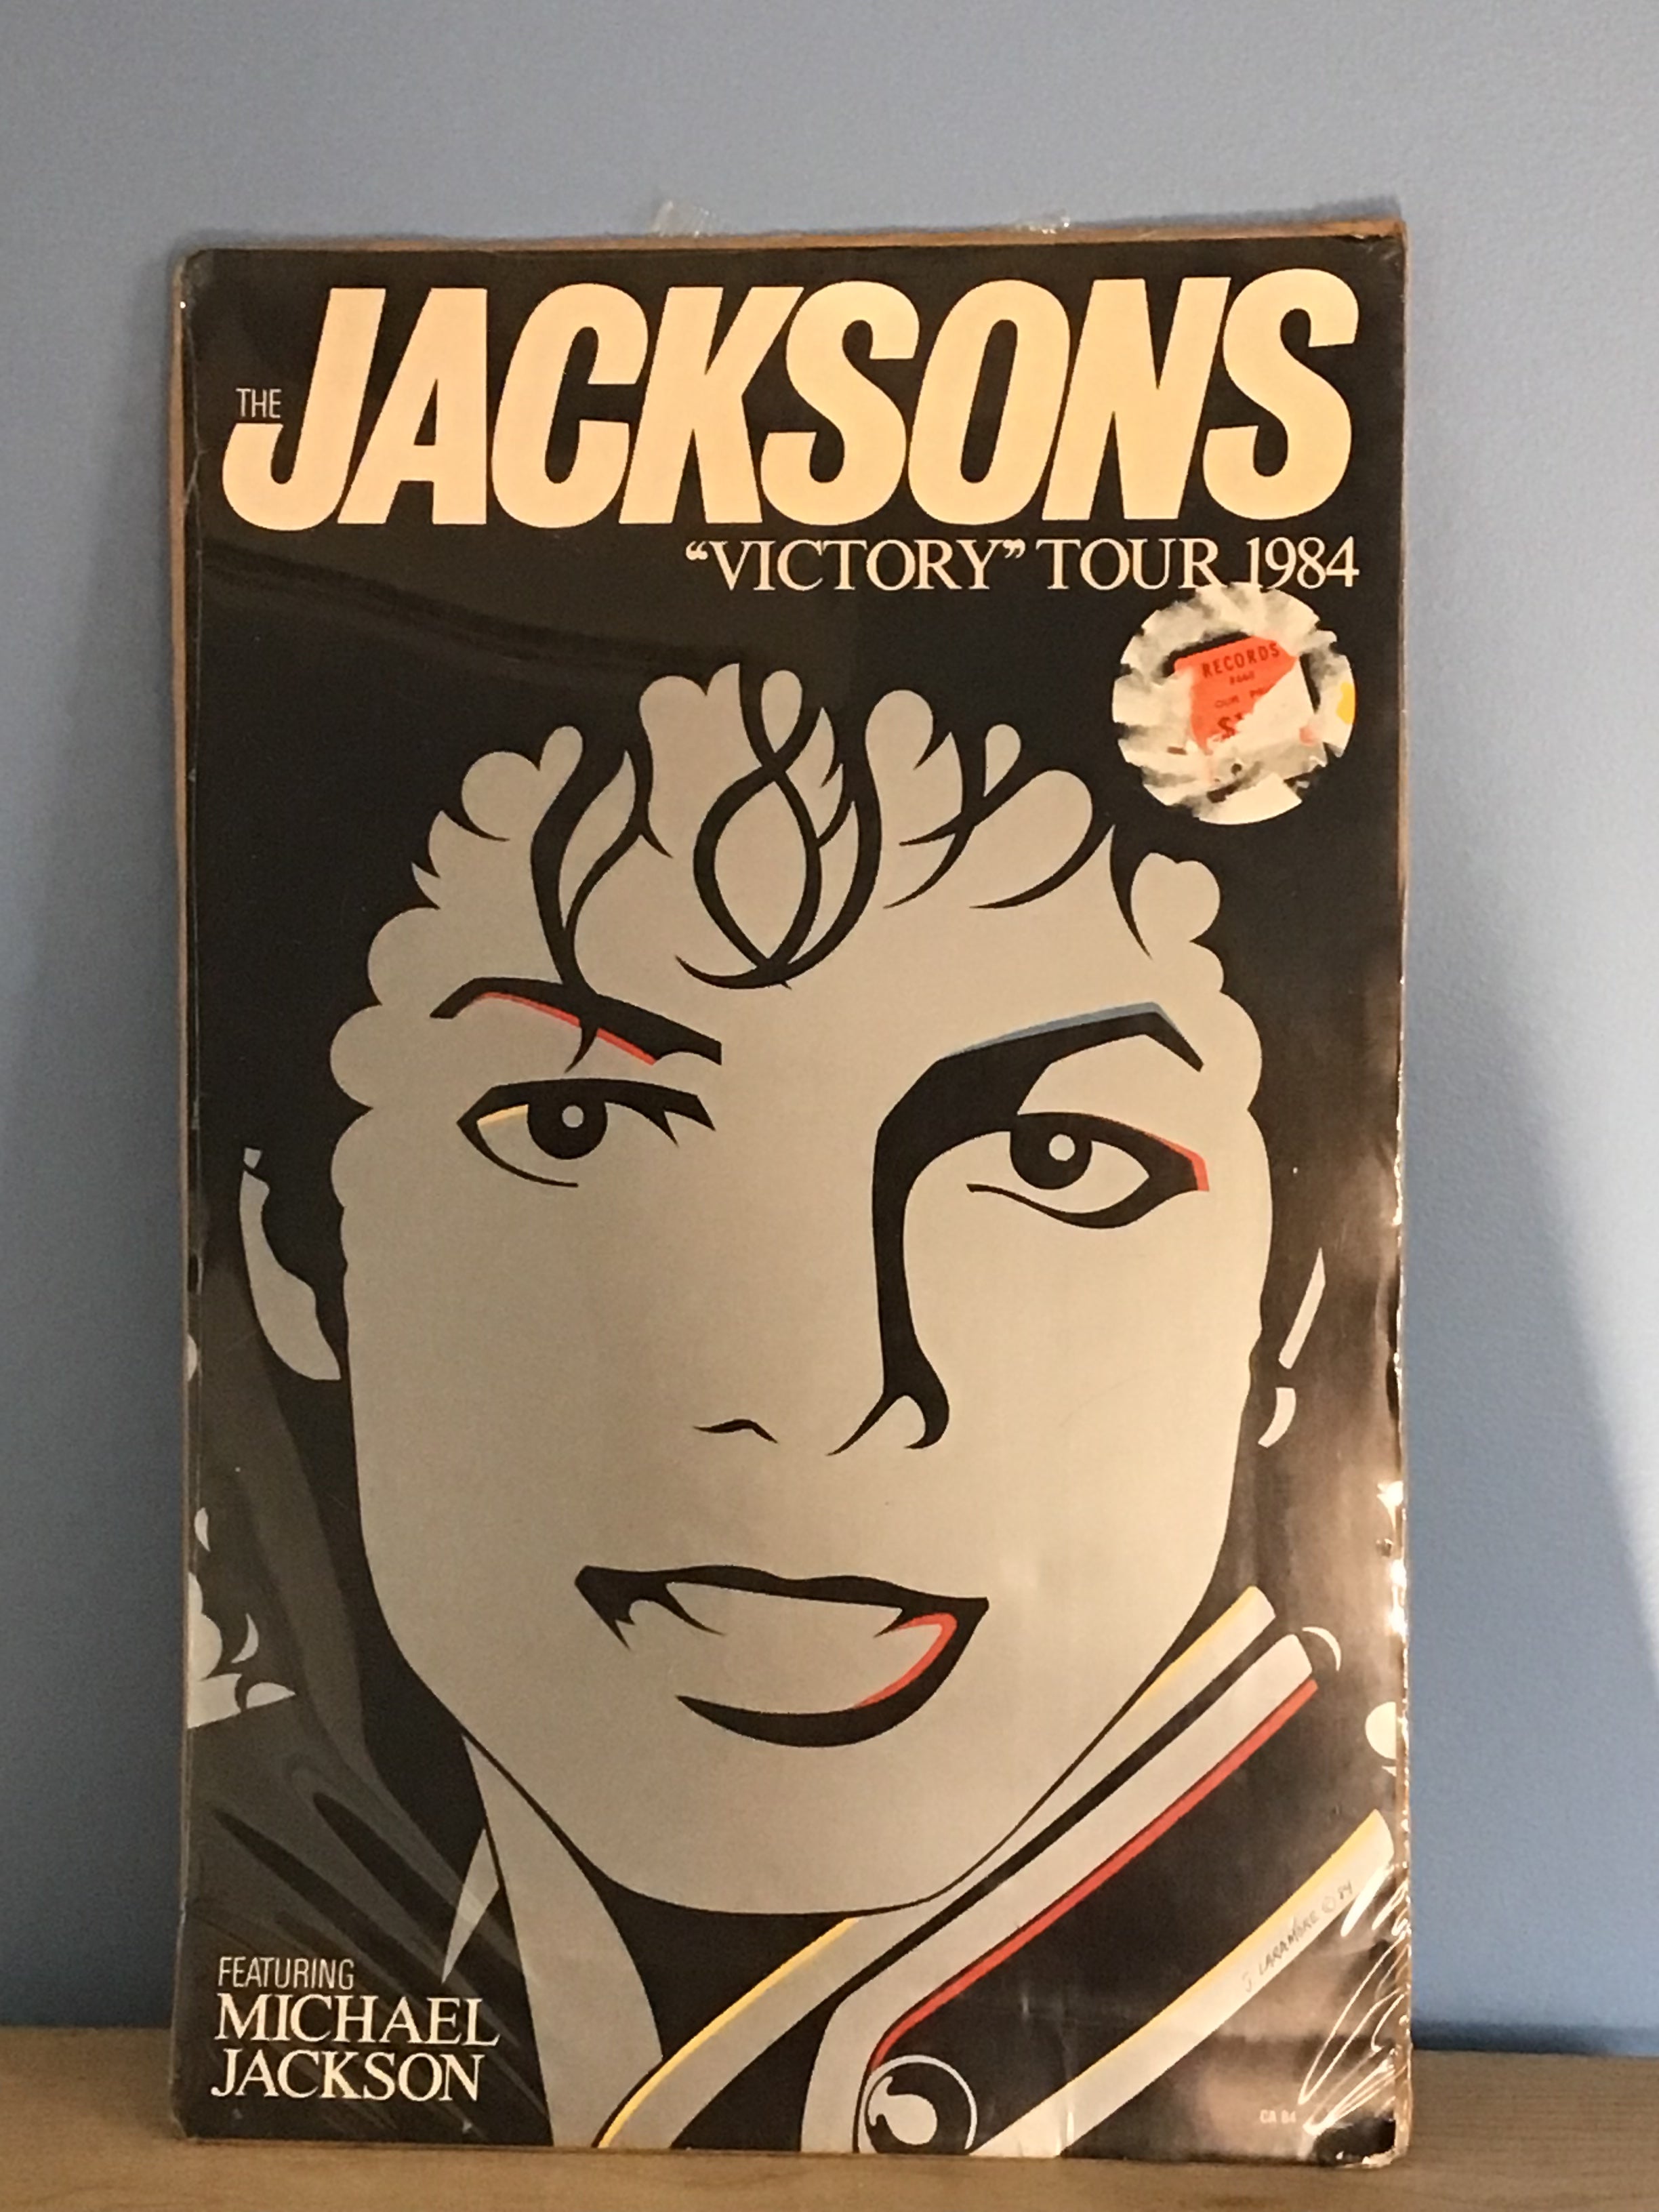 The Jacksons Victory Tour USA  Featuring Michael Jackson